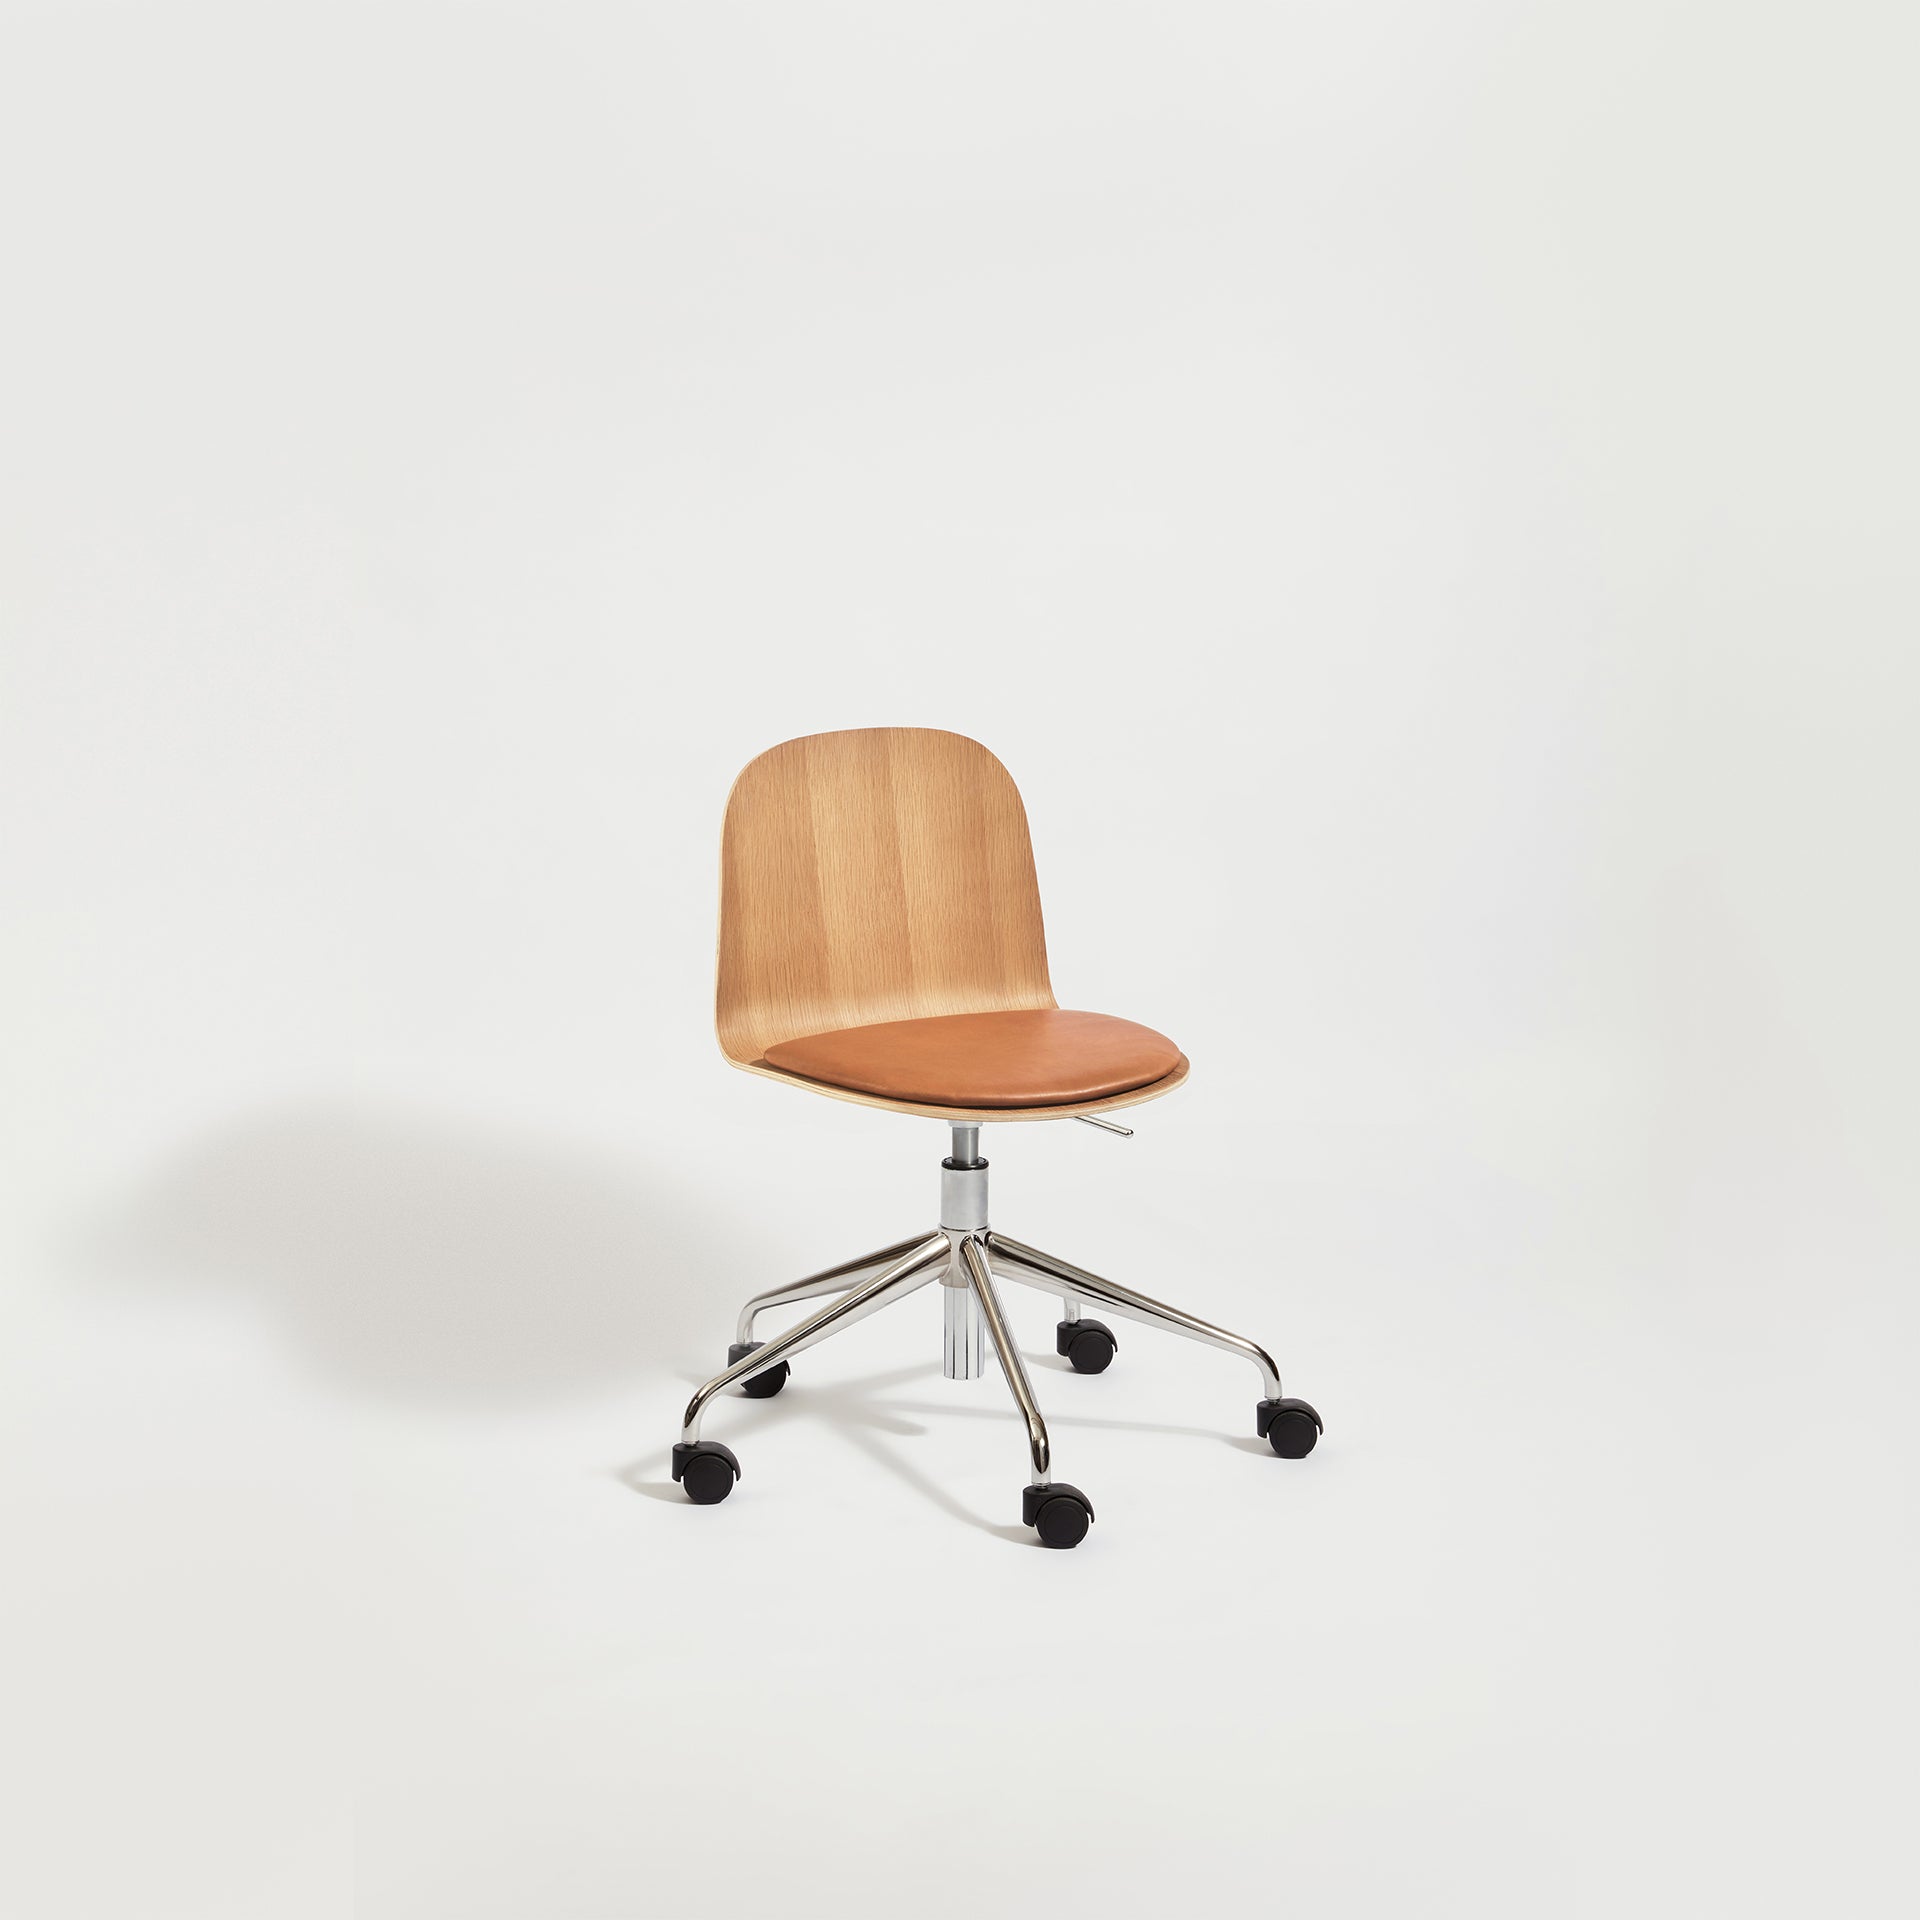 Potato Chair | Swivel Gaslift & Timber Dining Office Chair with Handle | GibsonKarlo | DesignByThem